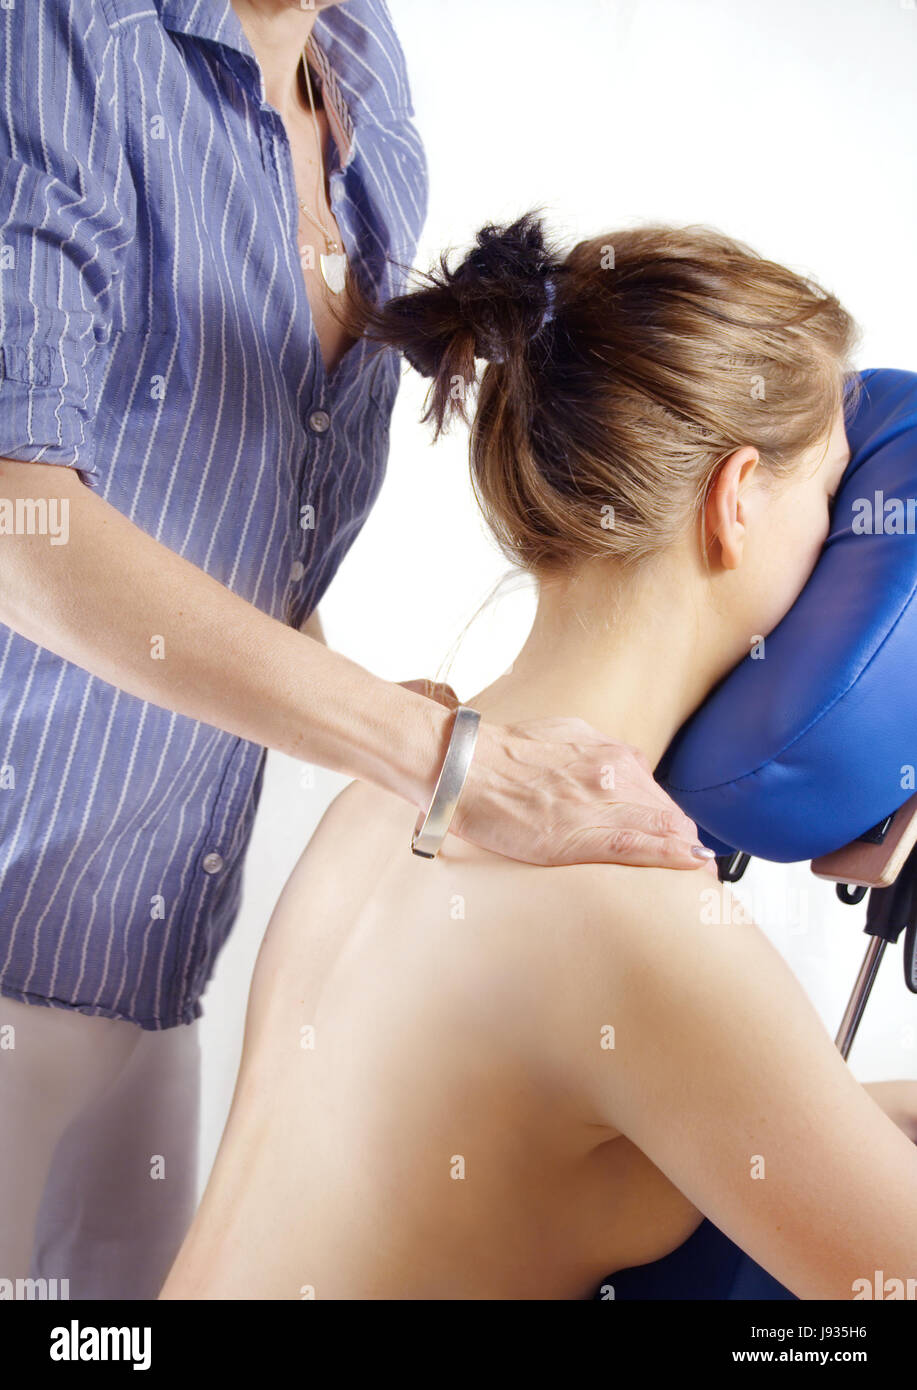 massage, physiotherapy, physiotherapist, woman, relaxation, german, treatment, Stock Photo